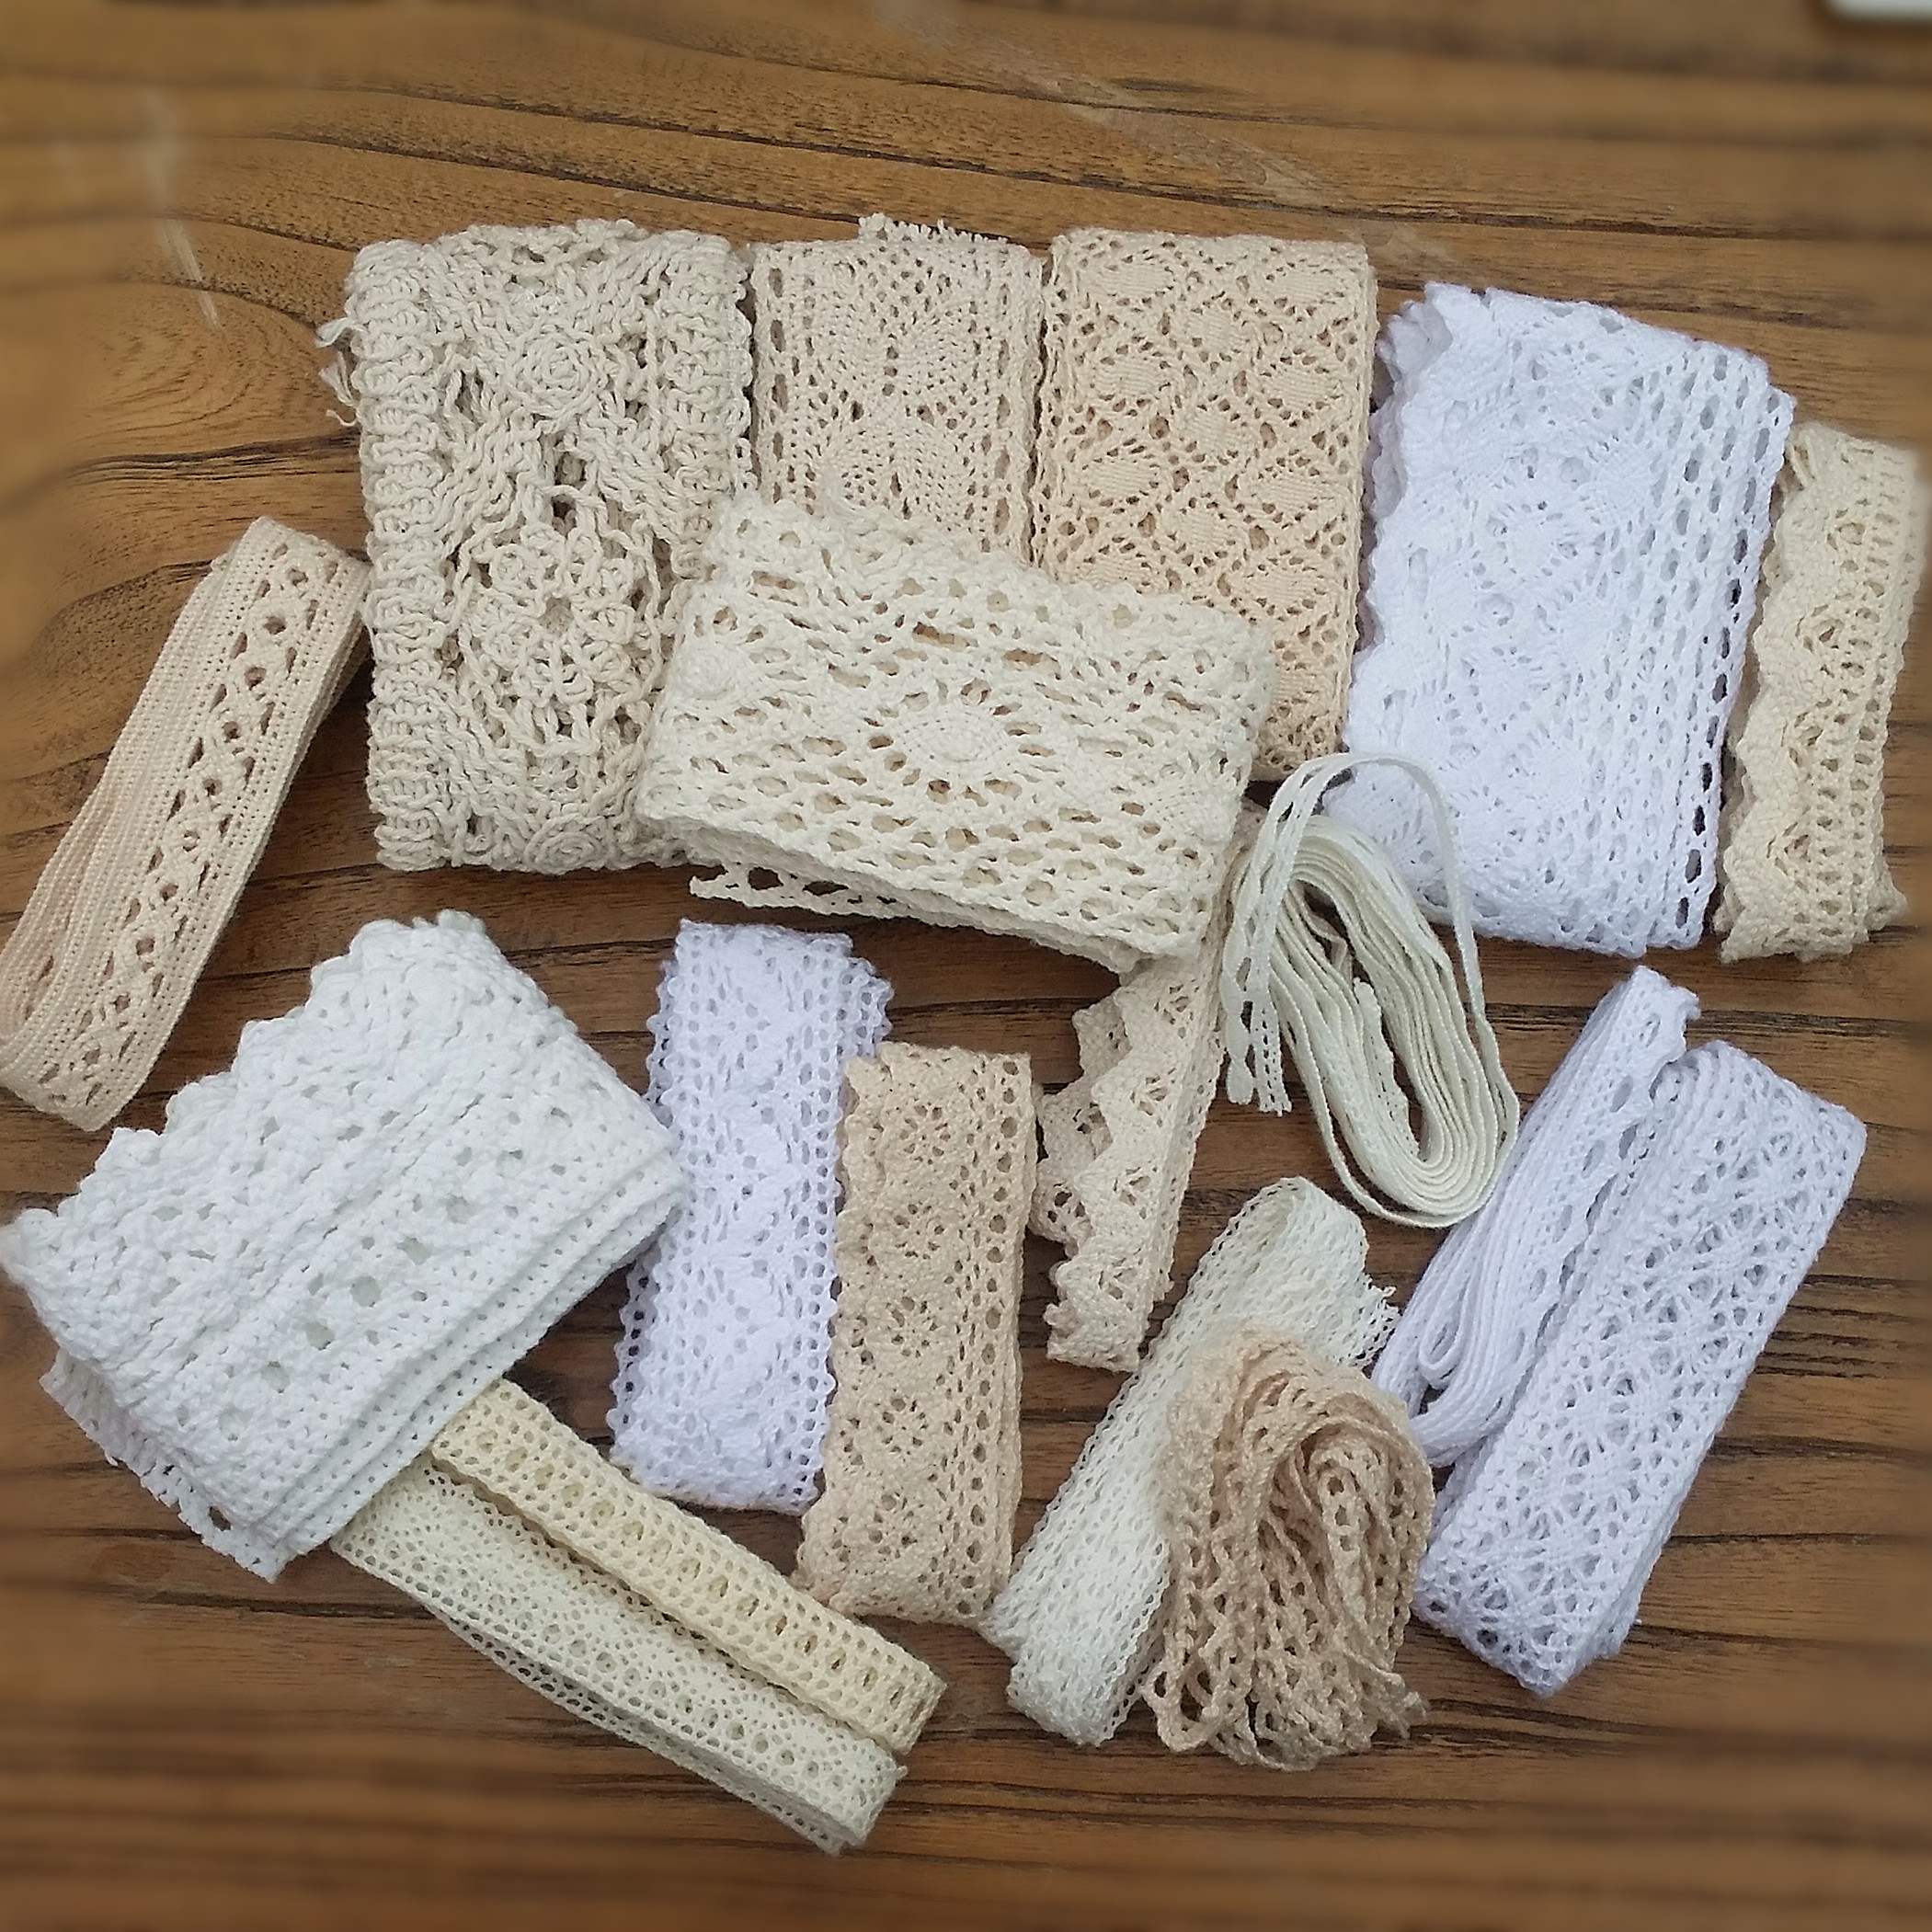 10Pcs Mixed Crocheted Cotton Lace Ribbon Beige Knitted Lace Trim DIY Accessories Scrapbooking 10Yards Laciness Ribbon